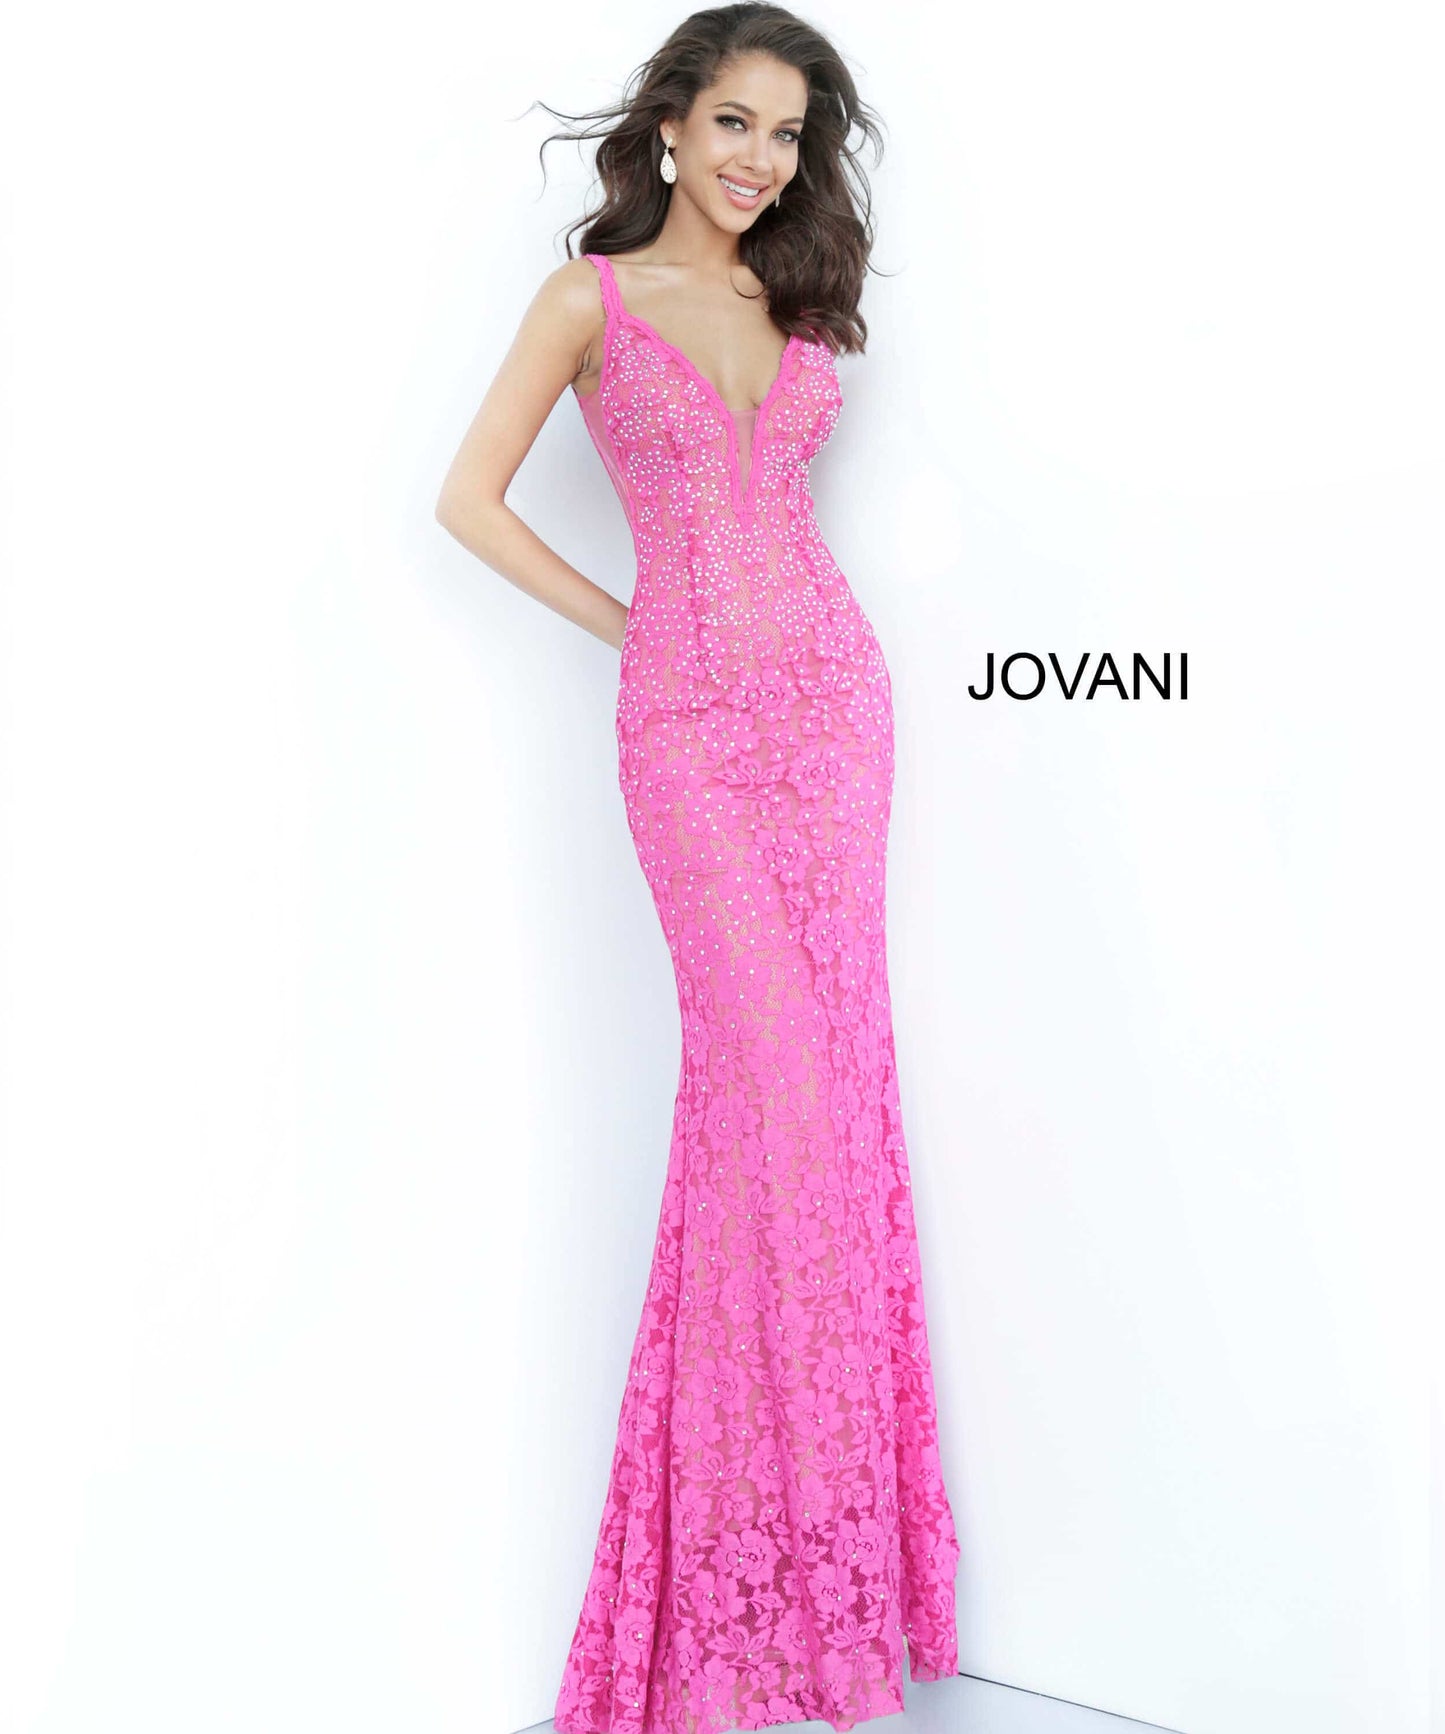 Jovani 48994 embellished stretch lace prom dress Pageant Gown Evening Dress Long